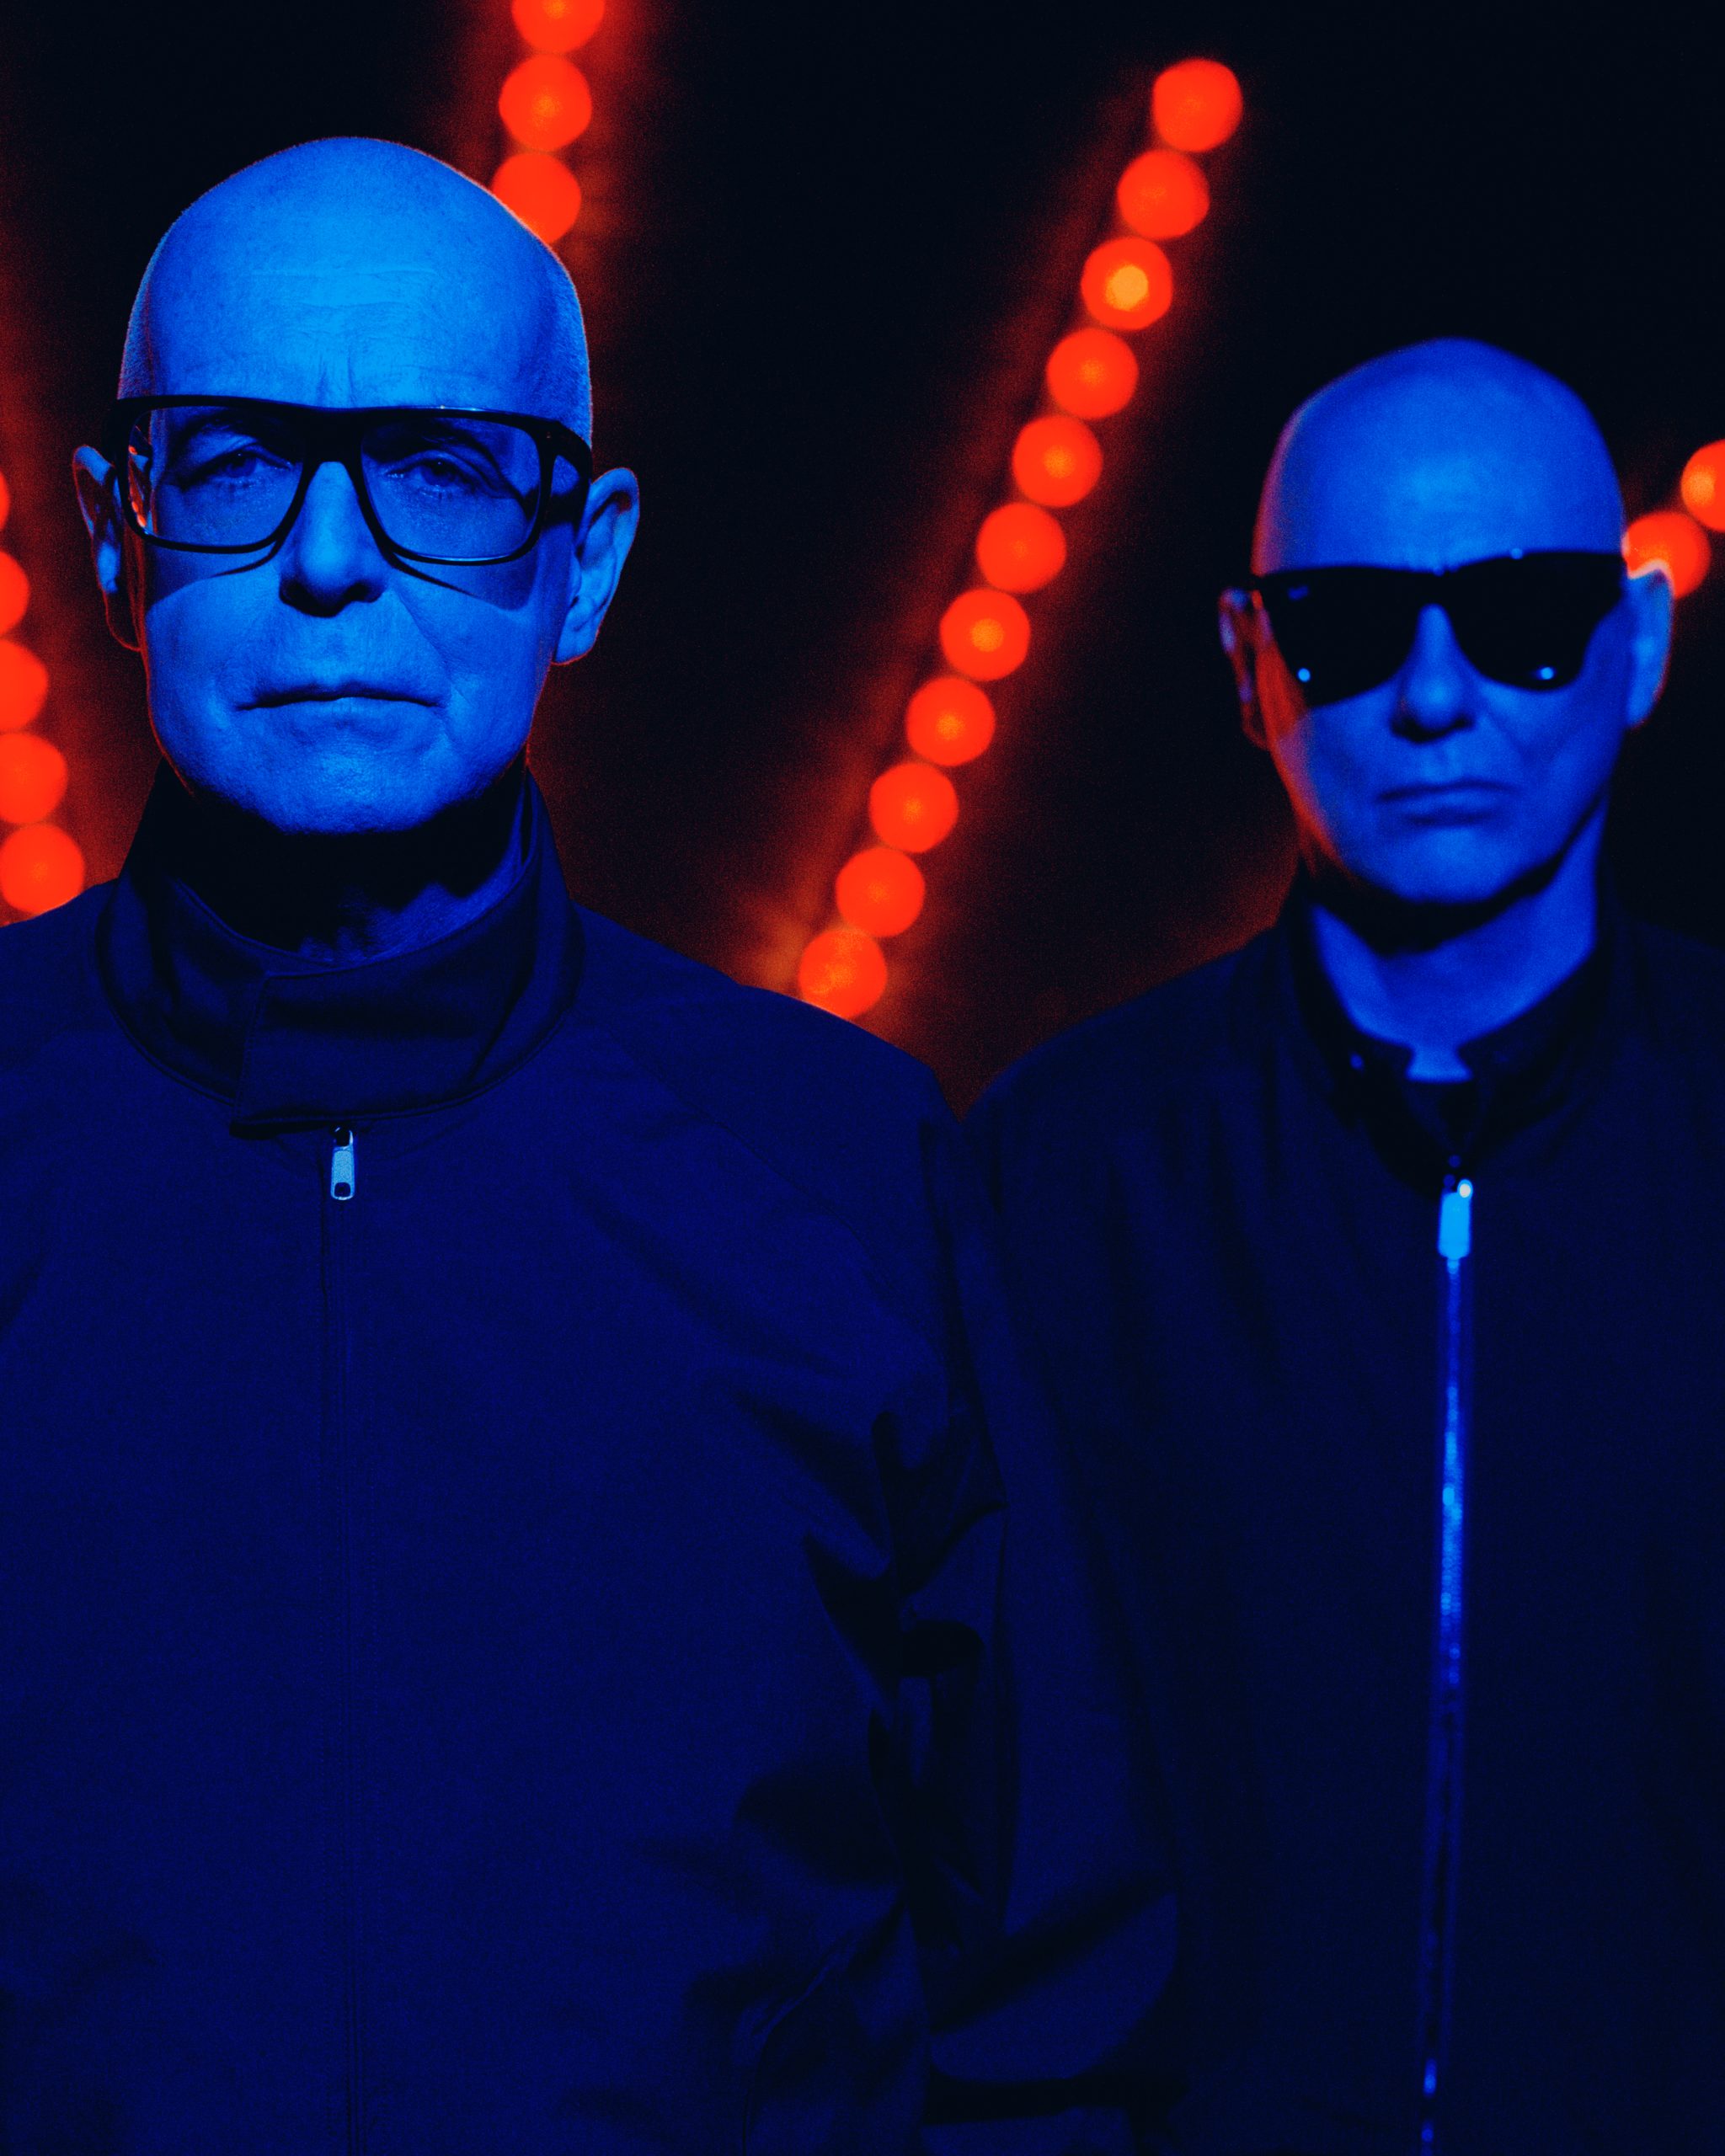 PET SHOP BOYS RELEASE THEIR BRAND-NEW STUDIO ALBUM ‘NONETHELESS’ ON PARLOPHONE RECORDS ON APRIL 26